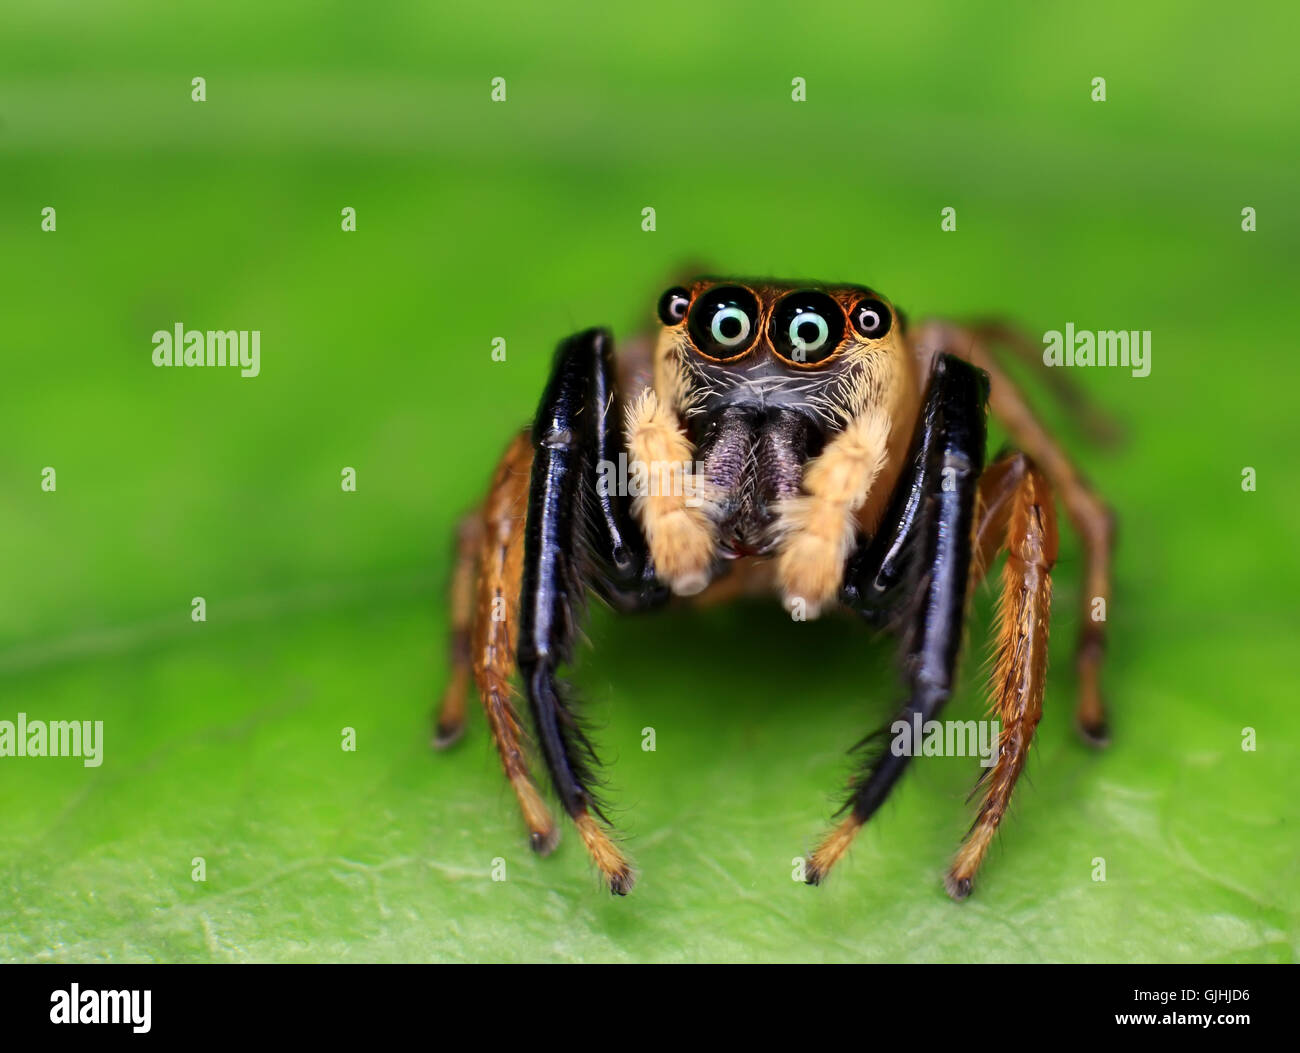 Jumping spider on green leaf, Malaysia Stock Photo